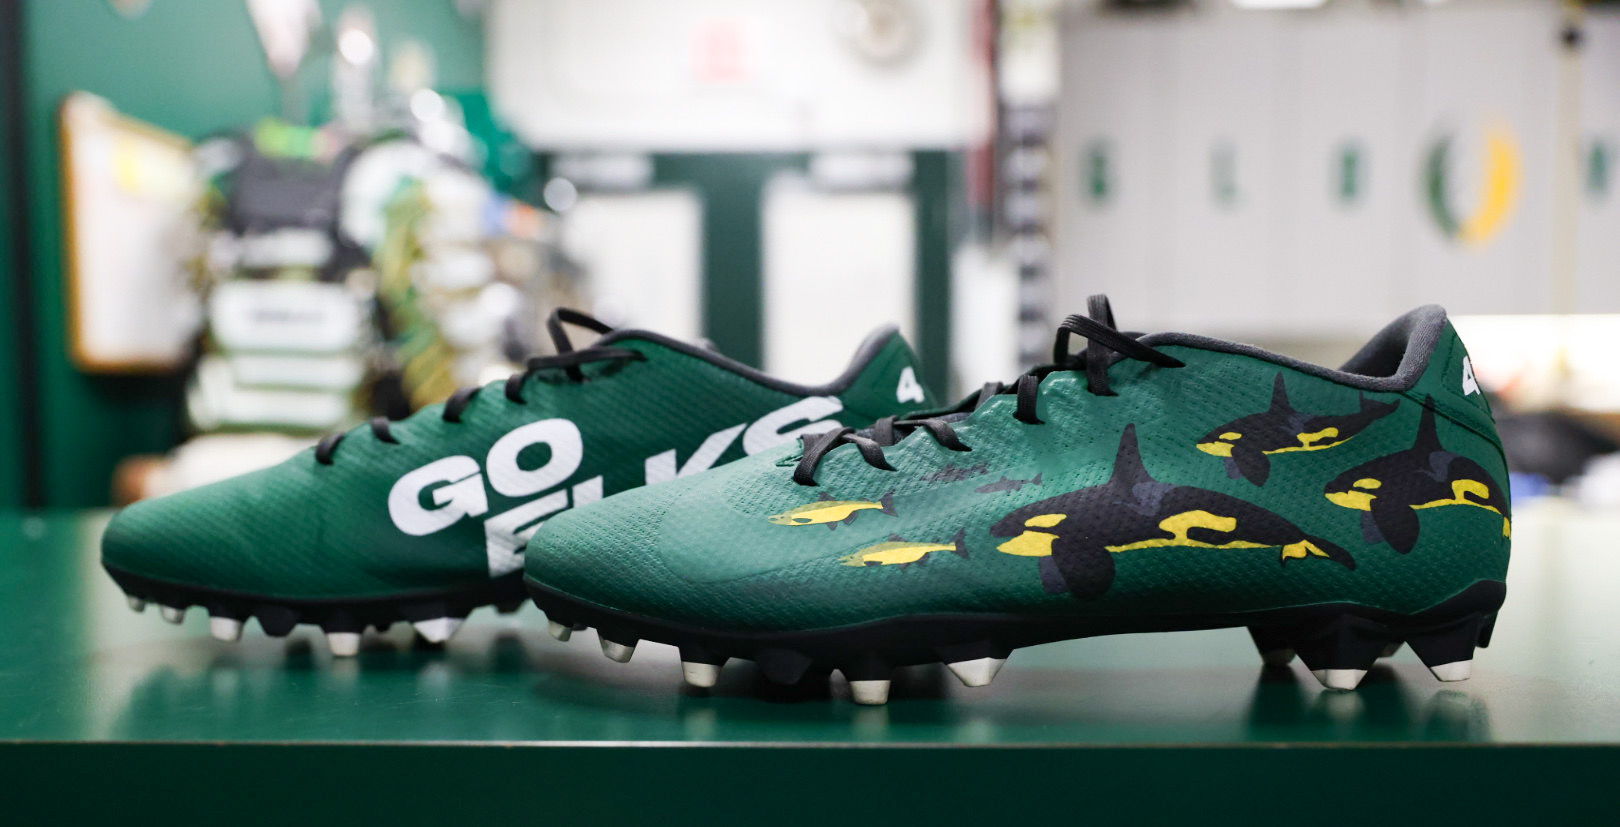 A picture of the cleats that will be worn by Nyles Morgan on Sunday, June 25th when the Elks take on the Toronto Argonauts.